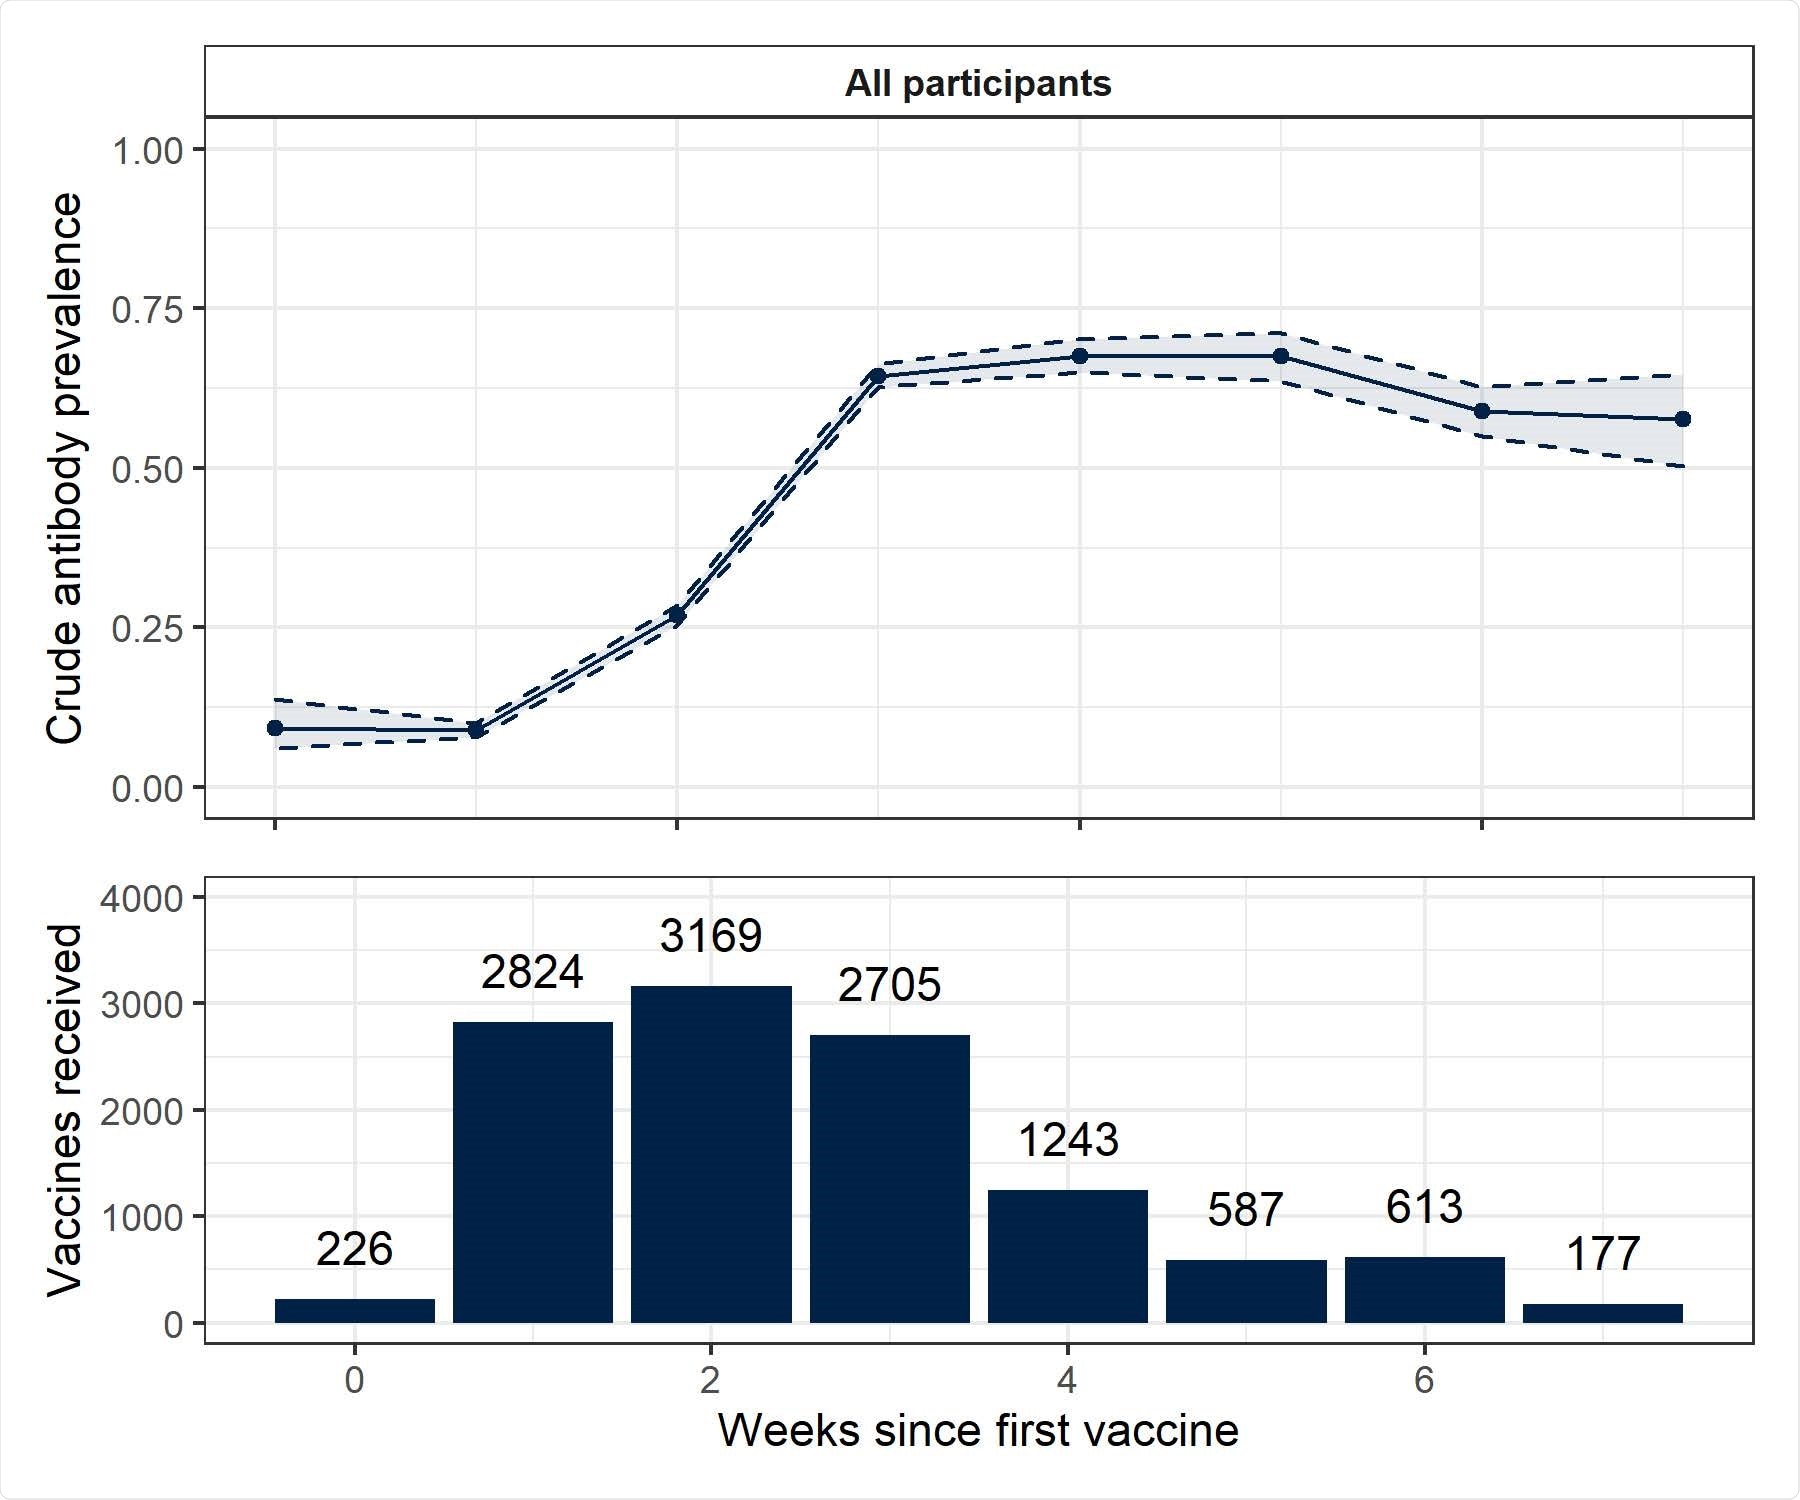 Unadjusted antibody positivity up to 7 weeks following single Pfizer-BioNTech vaccination (aggregated by week) Lower panel shows counts of vaccines received, aggregated by number of weeks since the vaccine was received. Upper plot shows unadjusted proportions of respondents who tested positive for antibodies, aggregated by number of weeks since the vaccine was received. Binomial confidence intervals constructed using the Wilson method are shown.